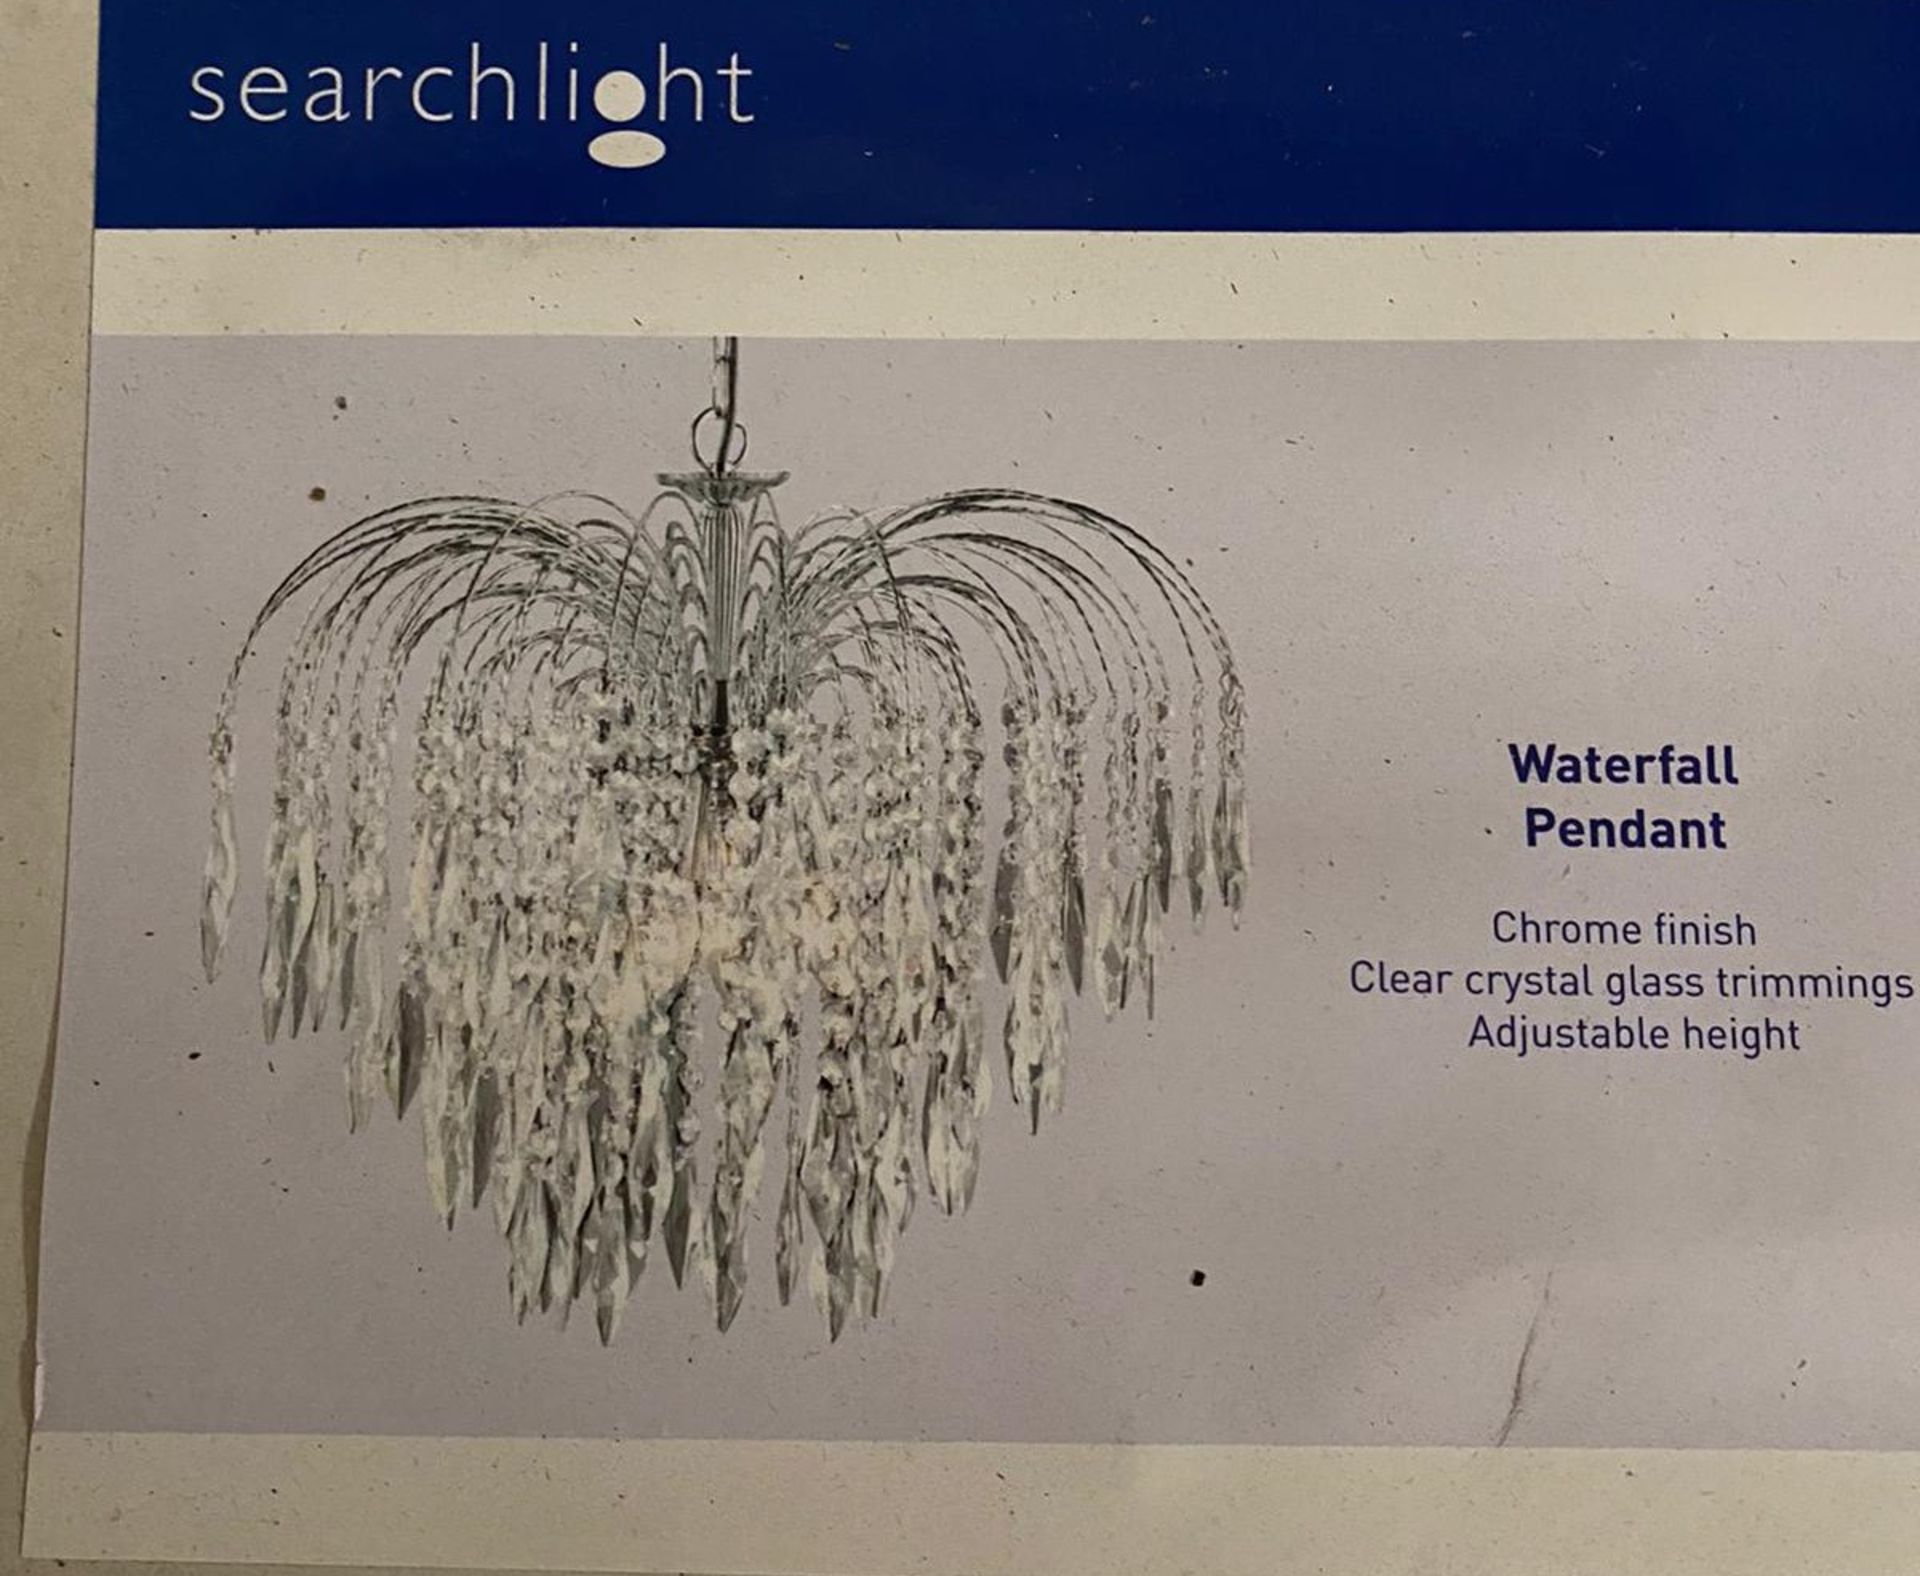 1 x Searchlight Waterfall Pendant in chrome - Ref: 4175-5 - New and Boxed - RRP: £500.00 - Image 4 of 4